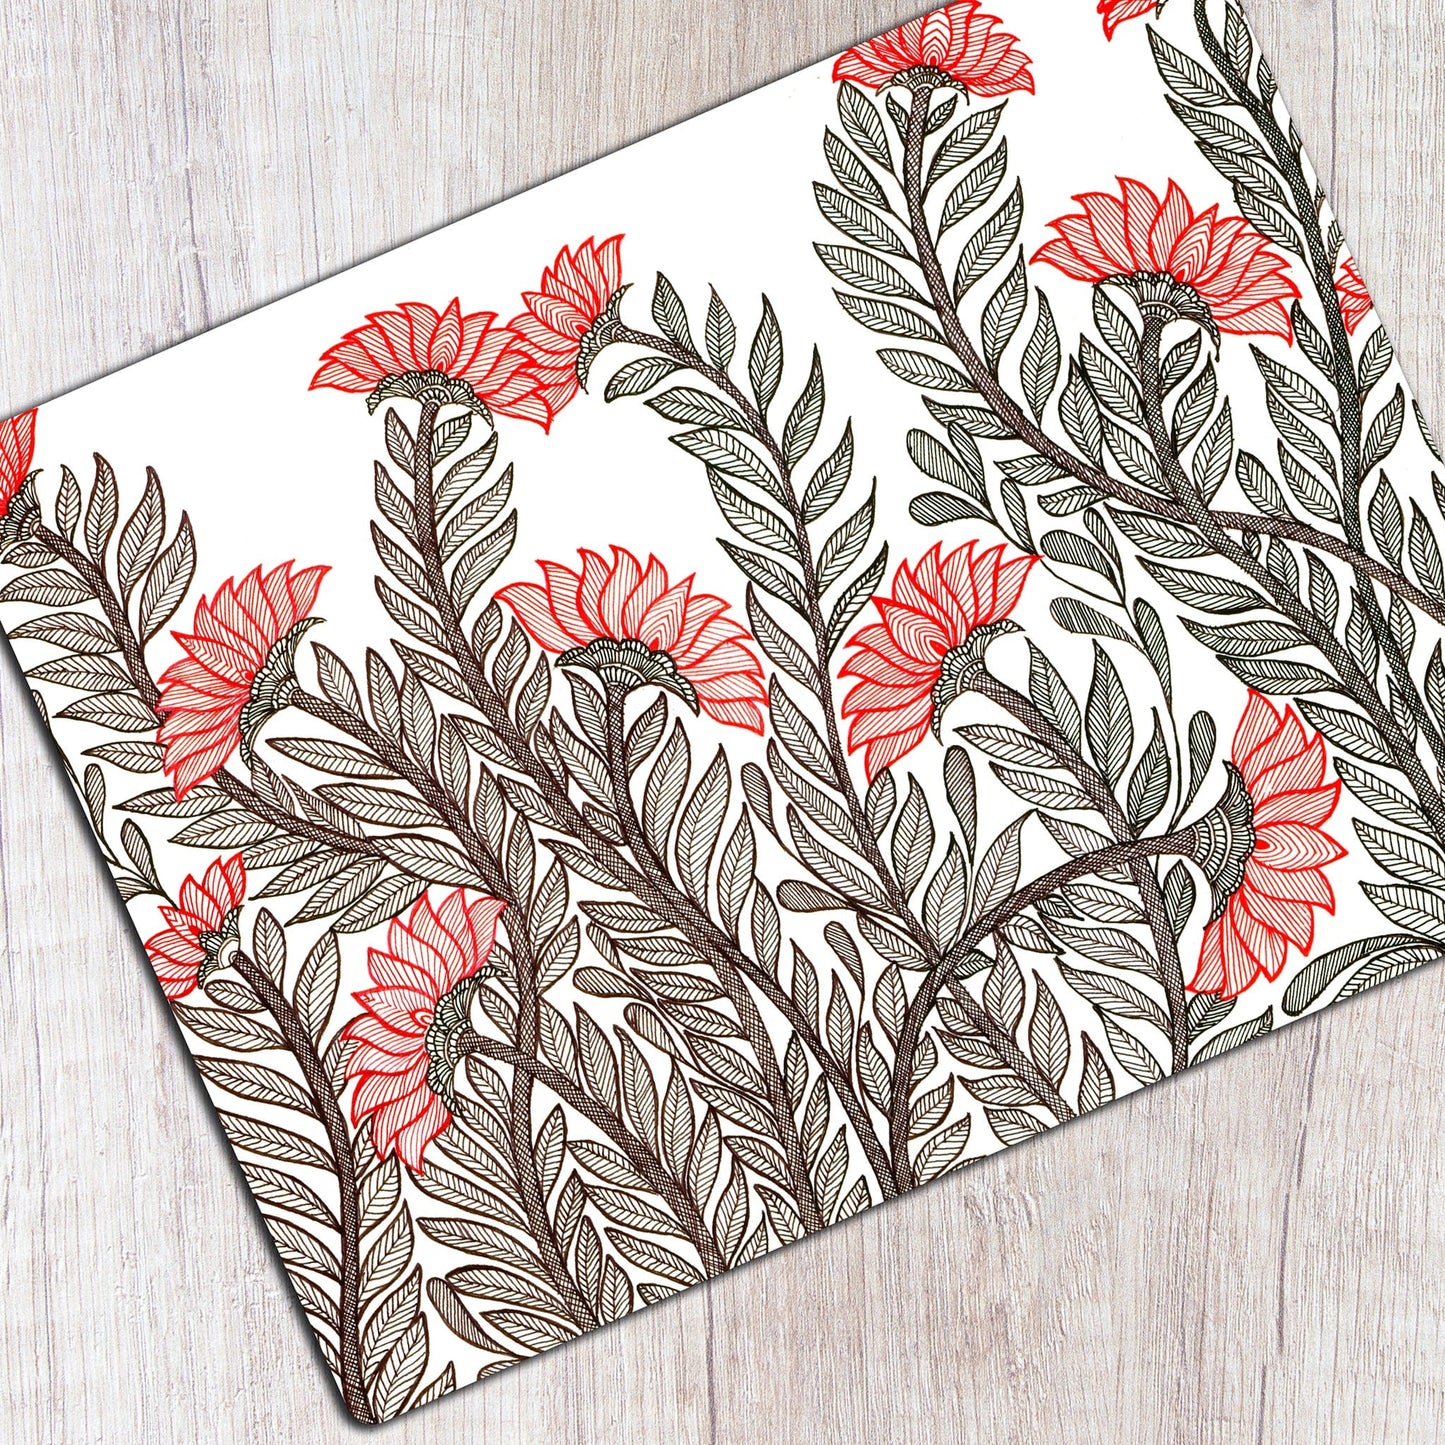 studio-decorai - The Indian Lily - Table Mats